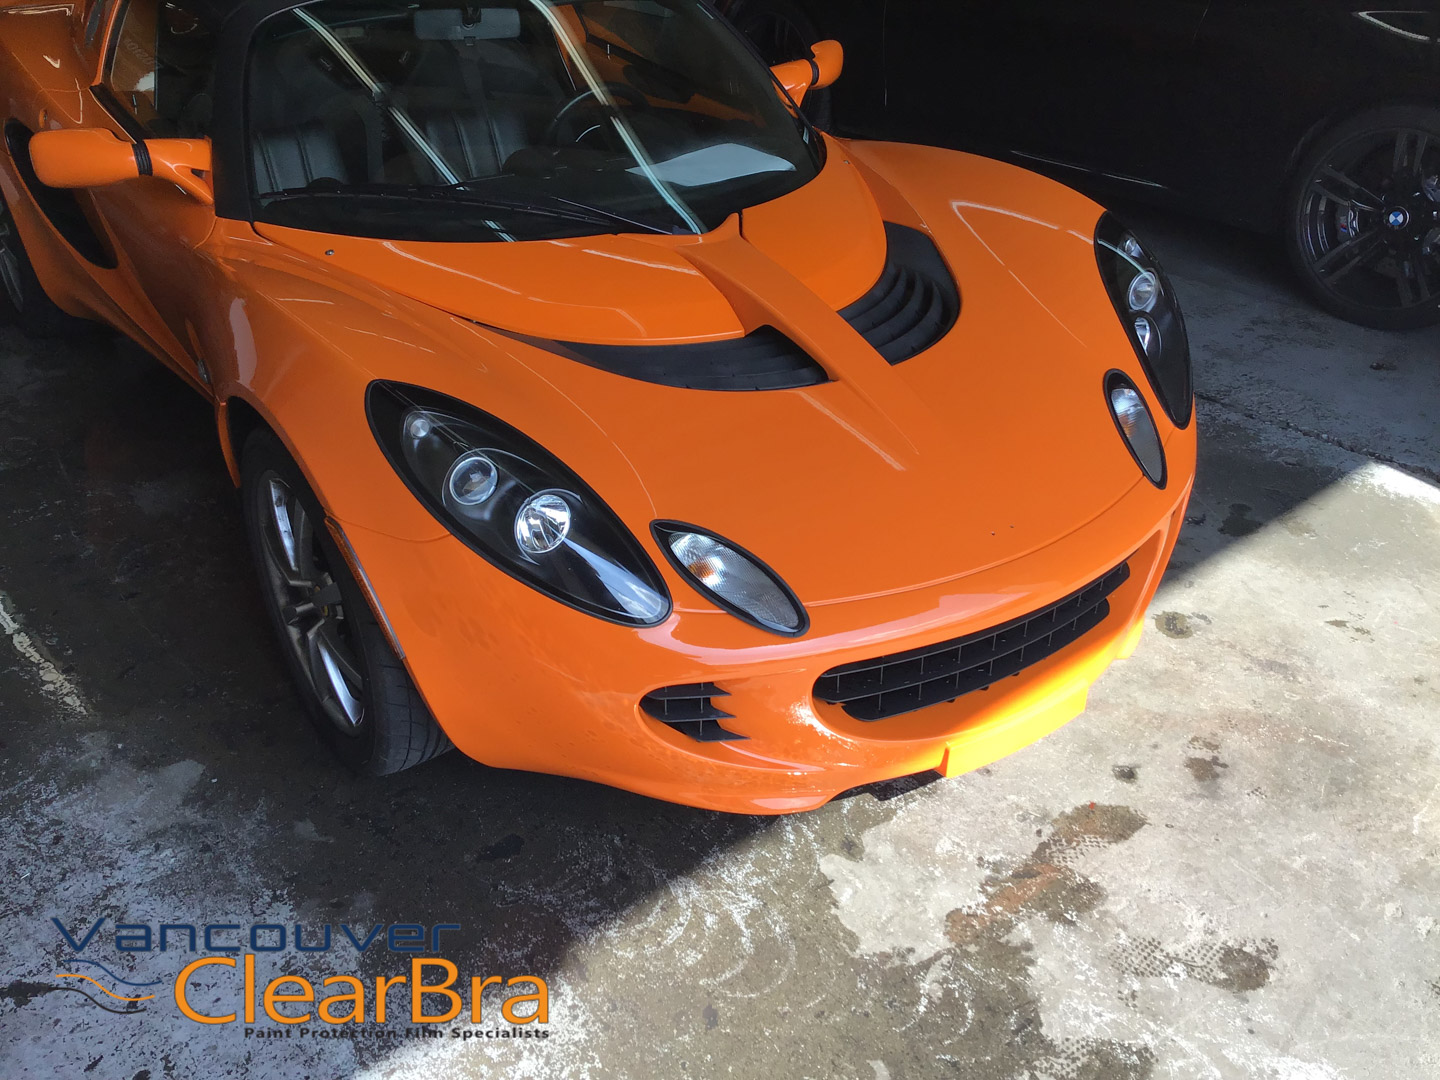 https://blog.vancouverclearbra.com/wp-content/uploads/2021/01/lotus-elise-xpel-ultimate-plus-clear-bra-paint-protection-film-Vancouver-ClearBra-4.jpg